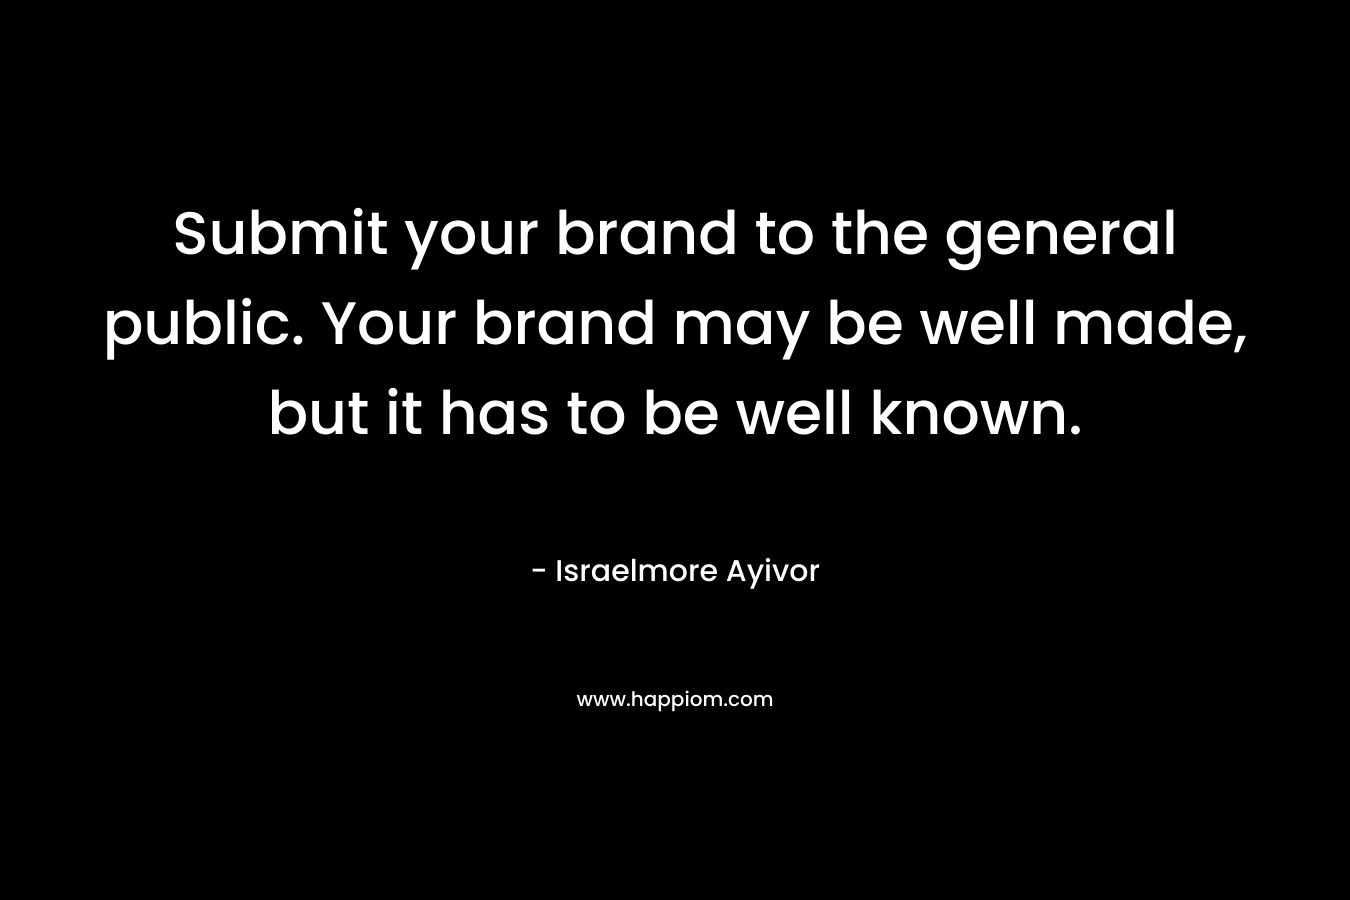 Submit your brand to the general public. Your brand may be well made, but it has to be well known.